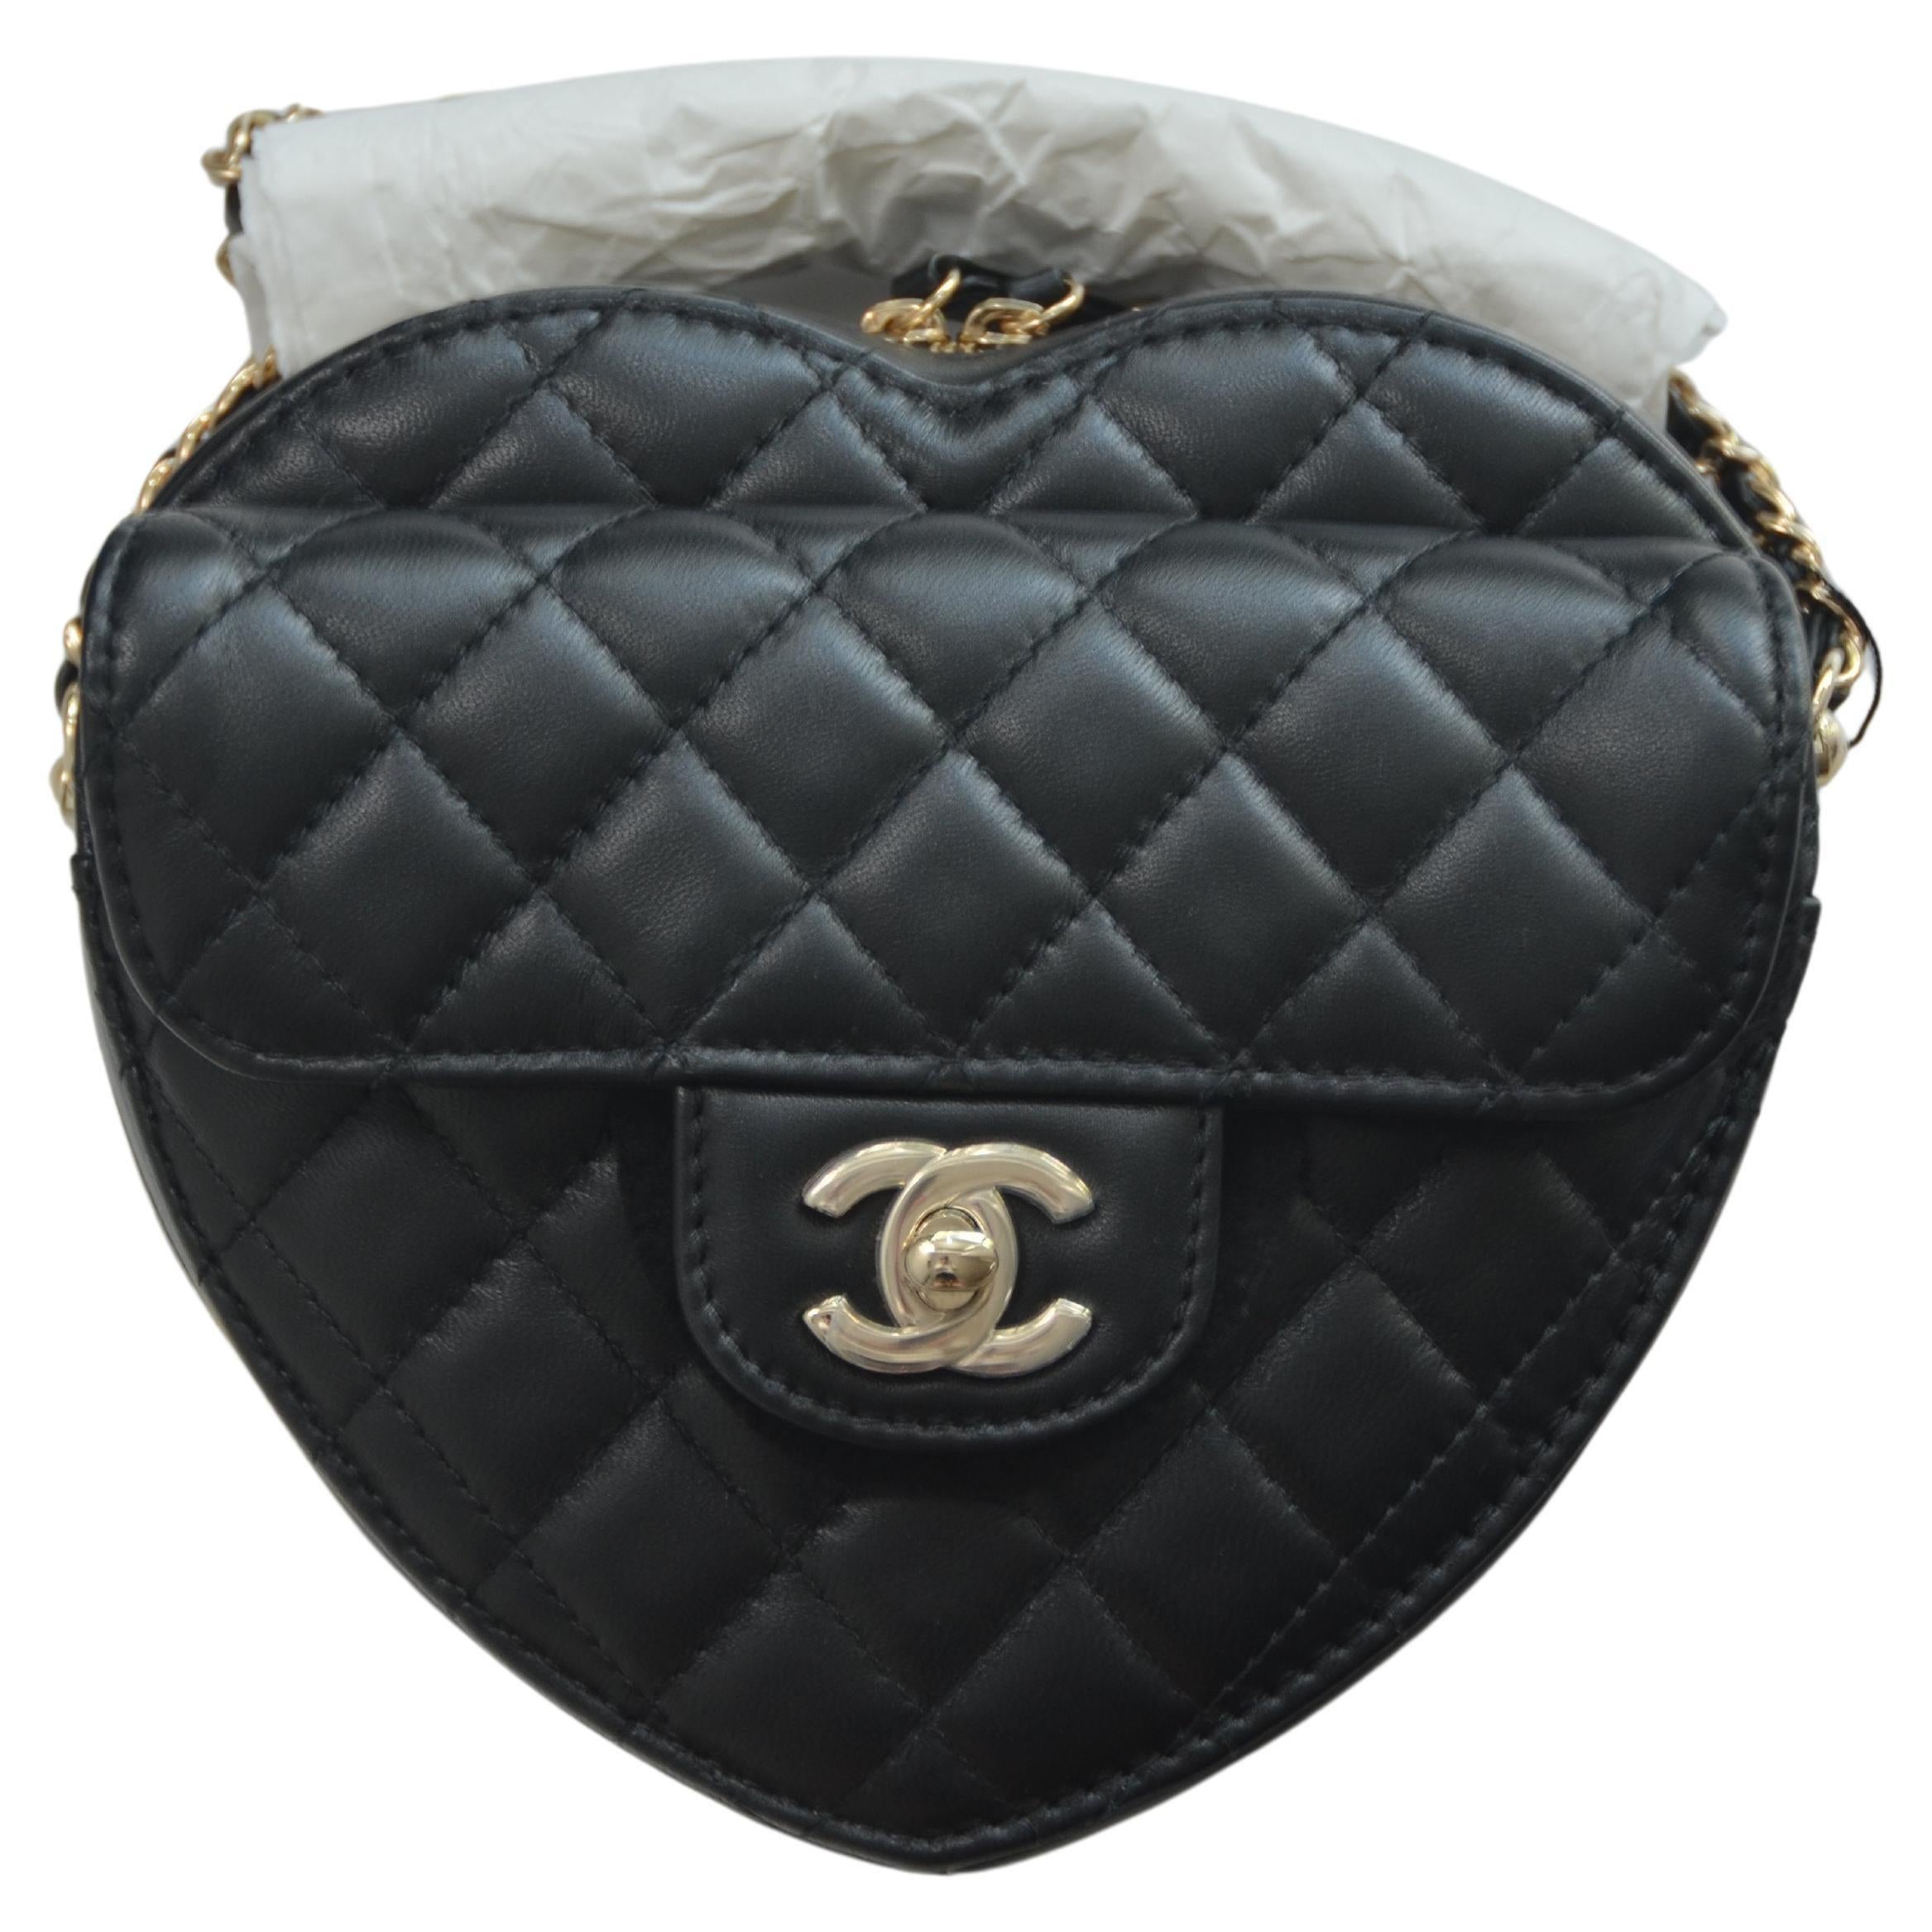 100% authentic guaranteed Chanel CHANEL Lambskin Gold-Tone Heart Handbag NEW With Tags Largest size in this style .Please check measurements . Approx. dimensions 6.4 × 7 × 2.5 in
Bag is pristine new with tags, clear plastic on CC turncock and comes